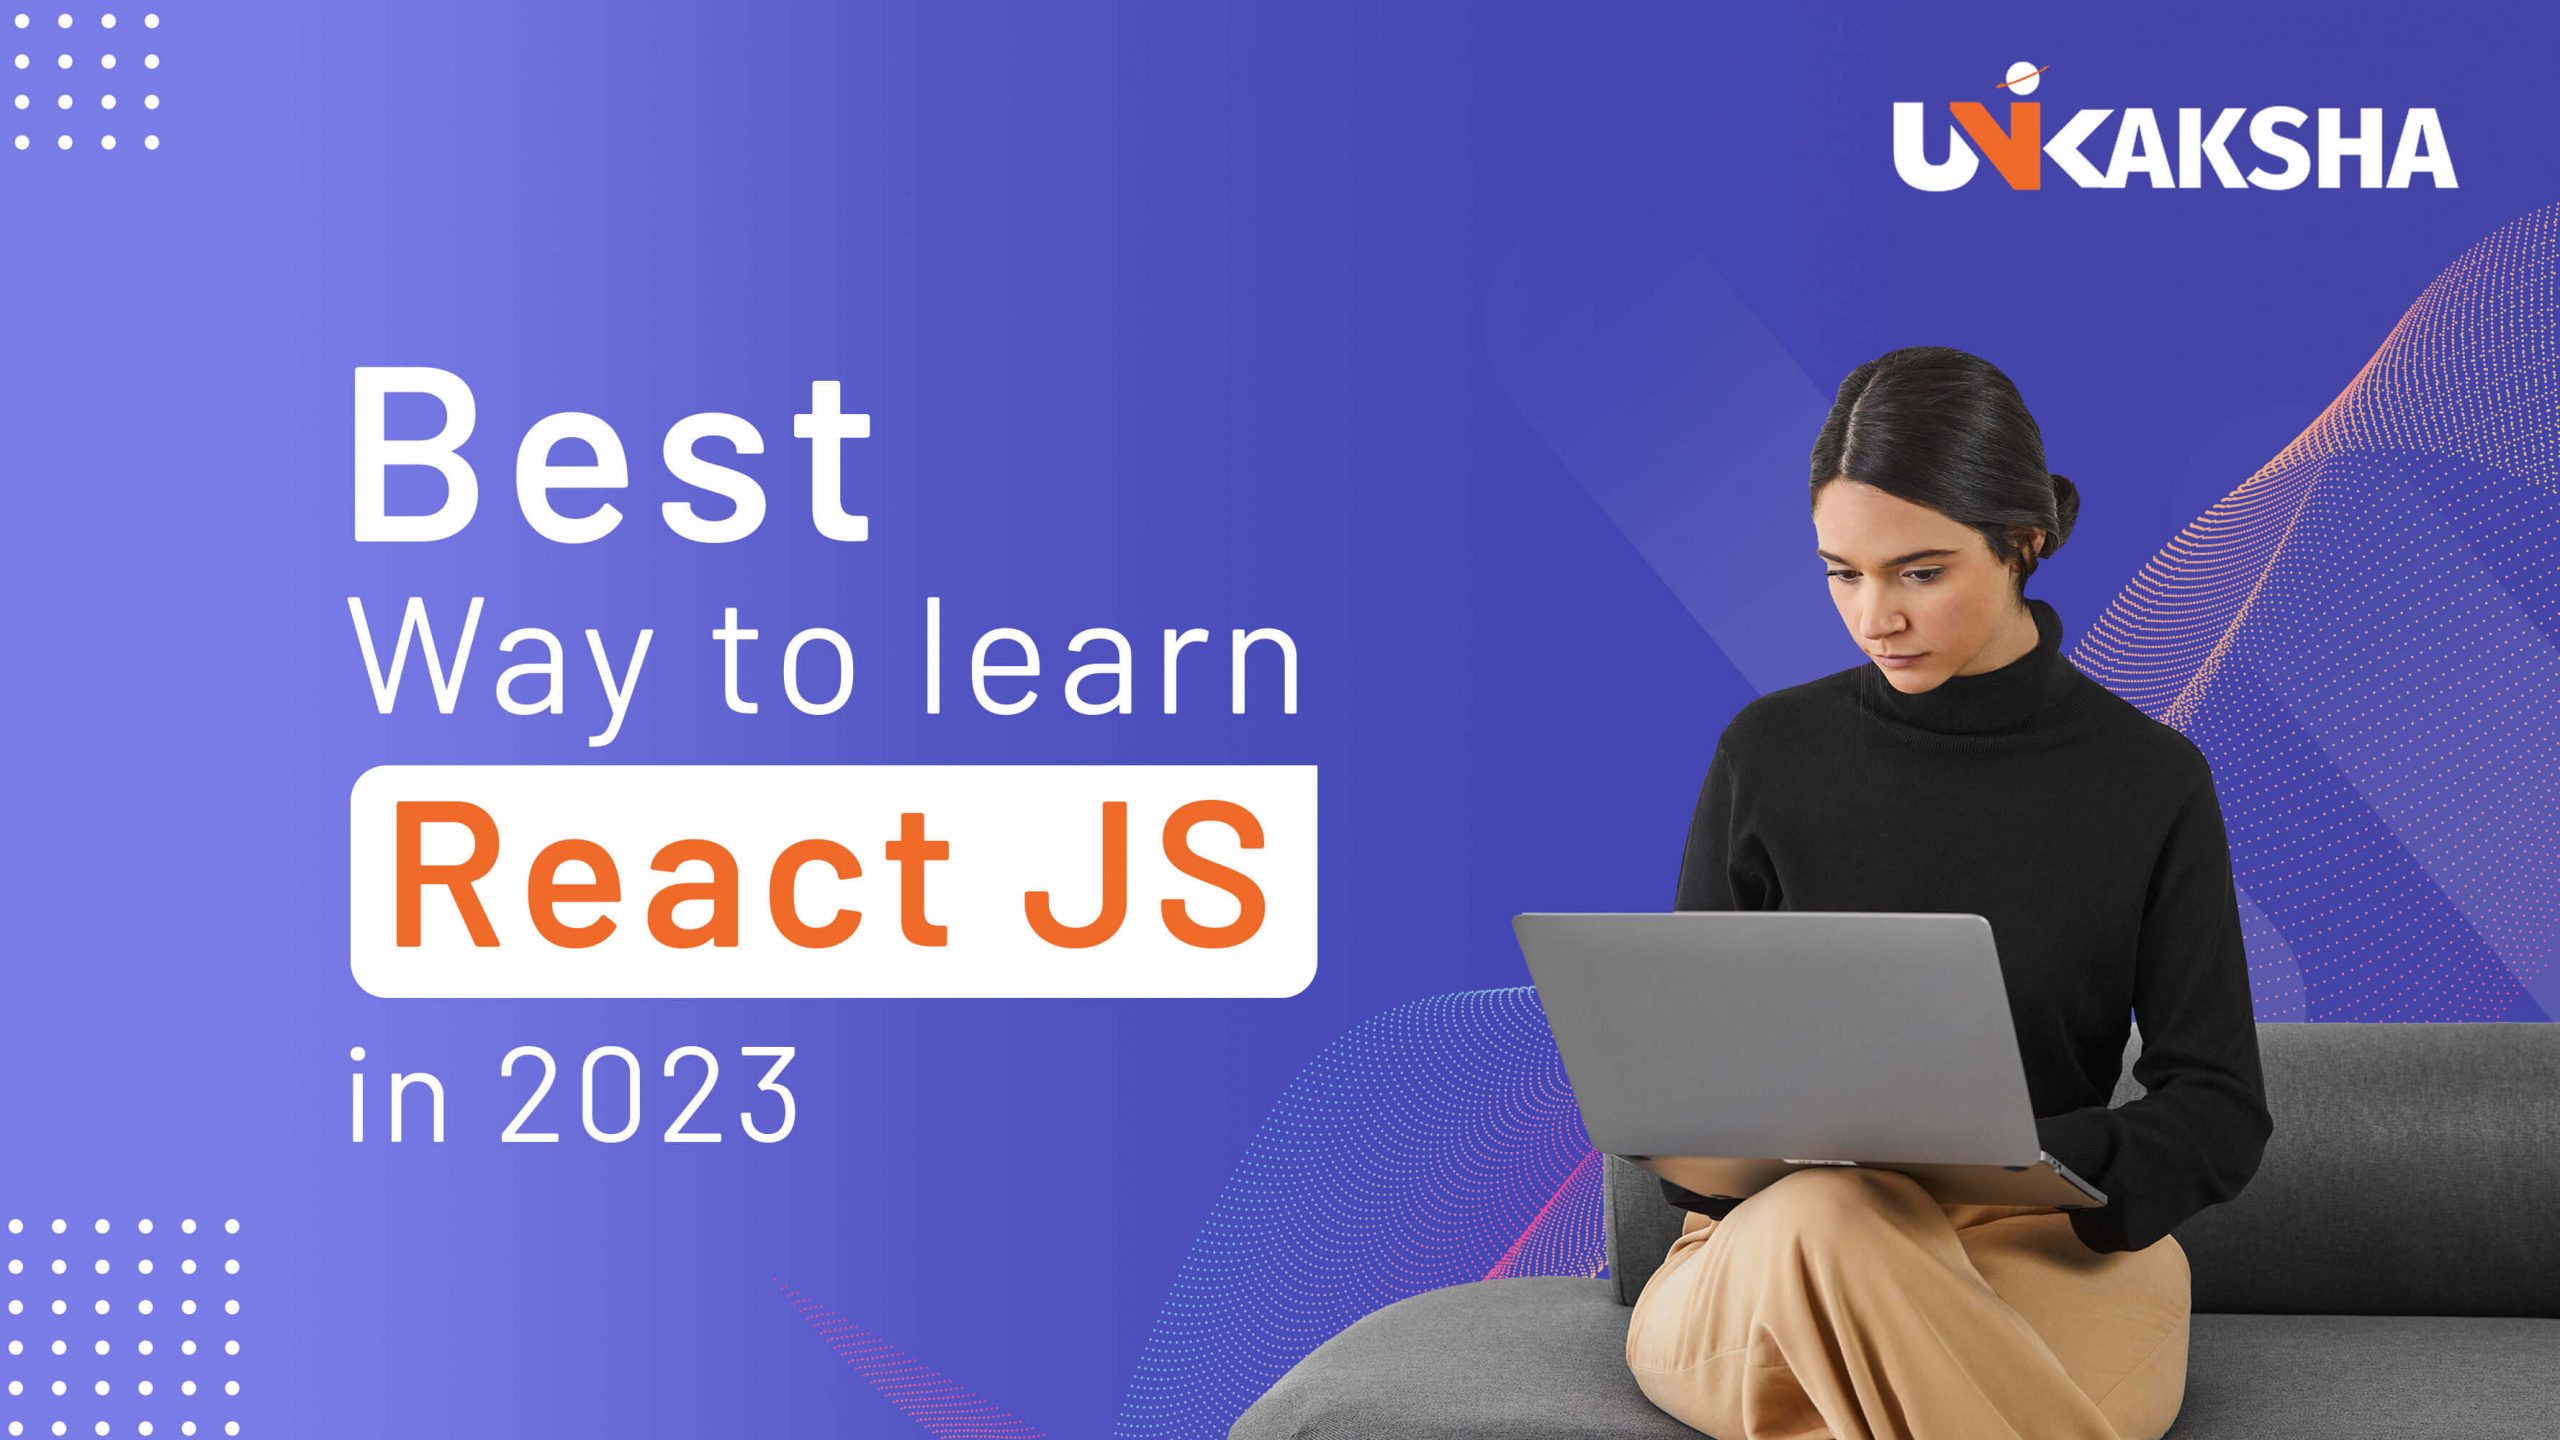 Best way to learn react js in 2023